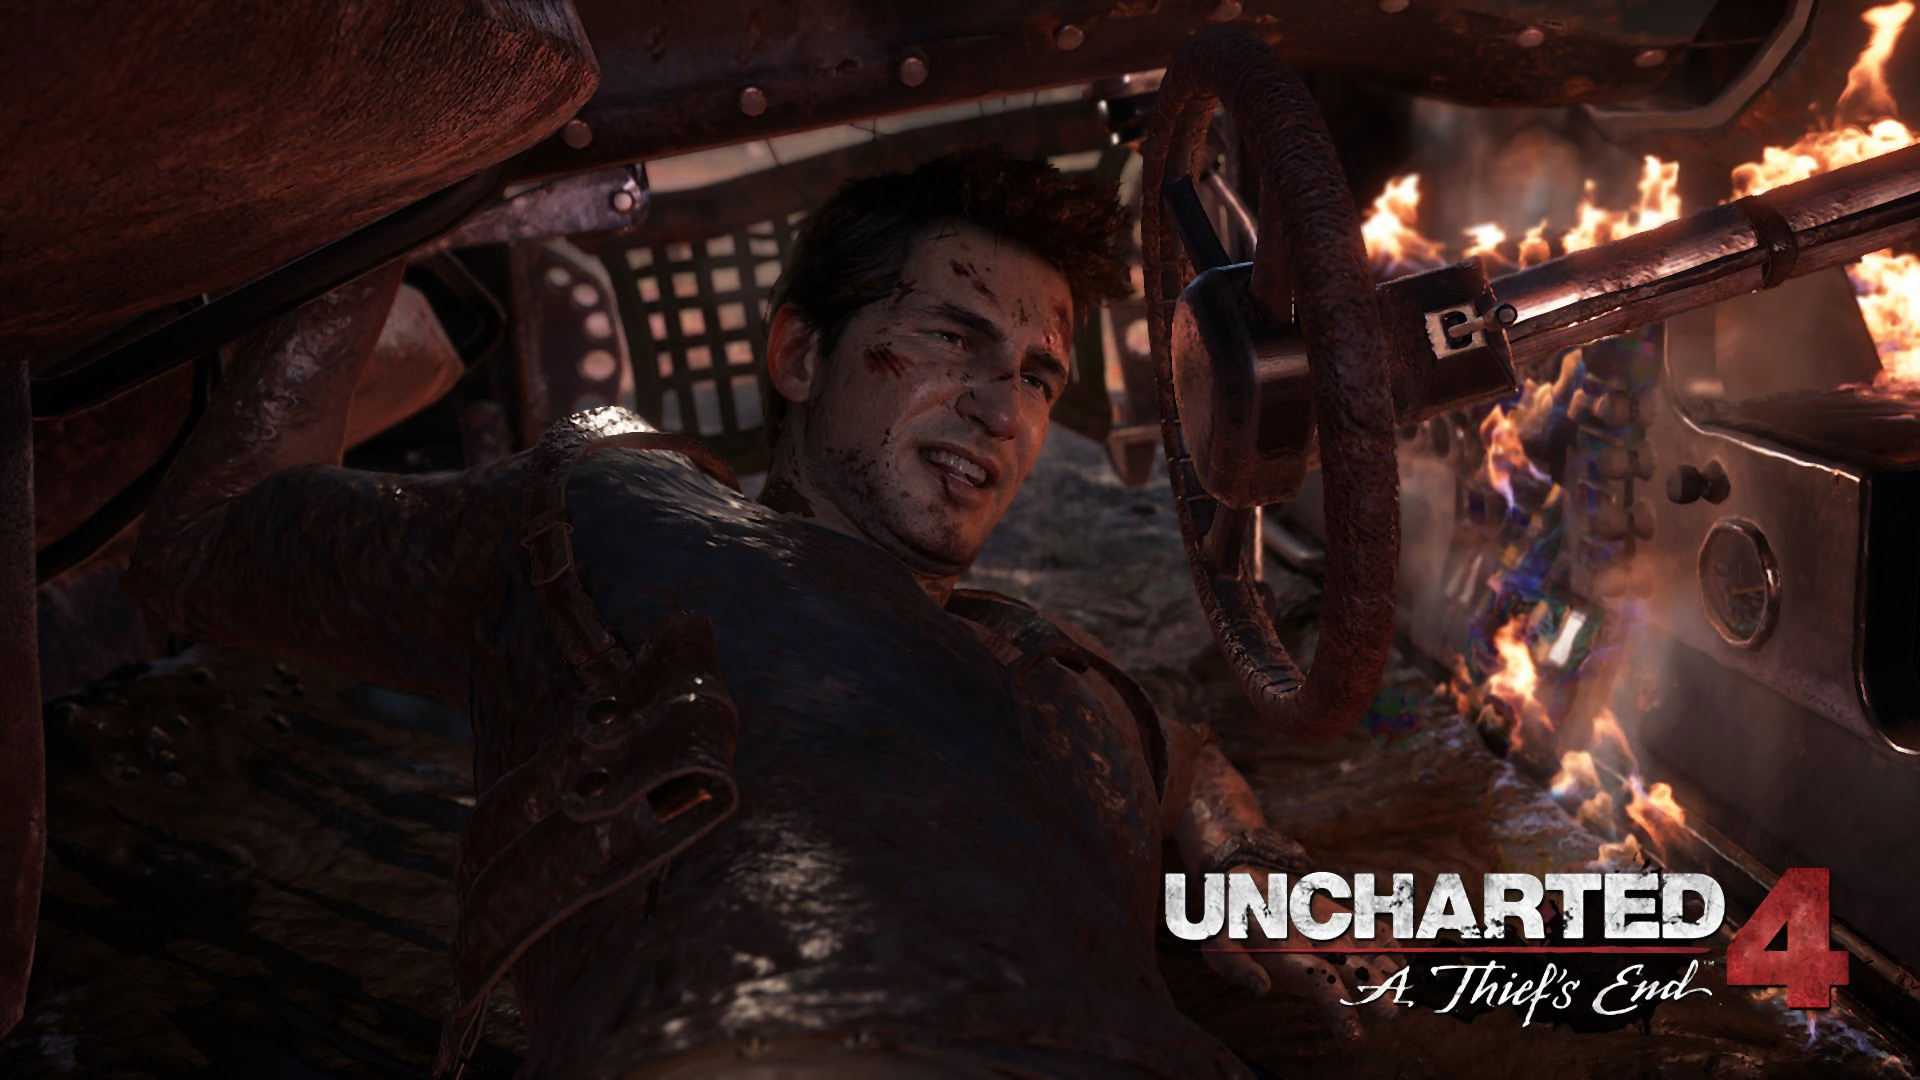 uncharted 4: a thief's end, video game, uncharted